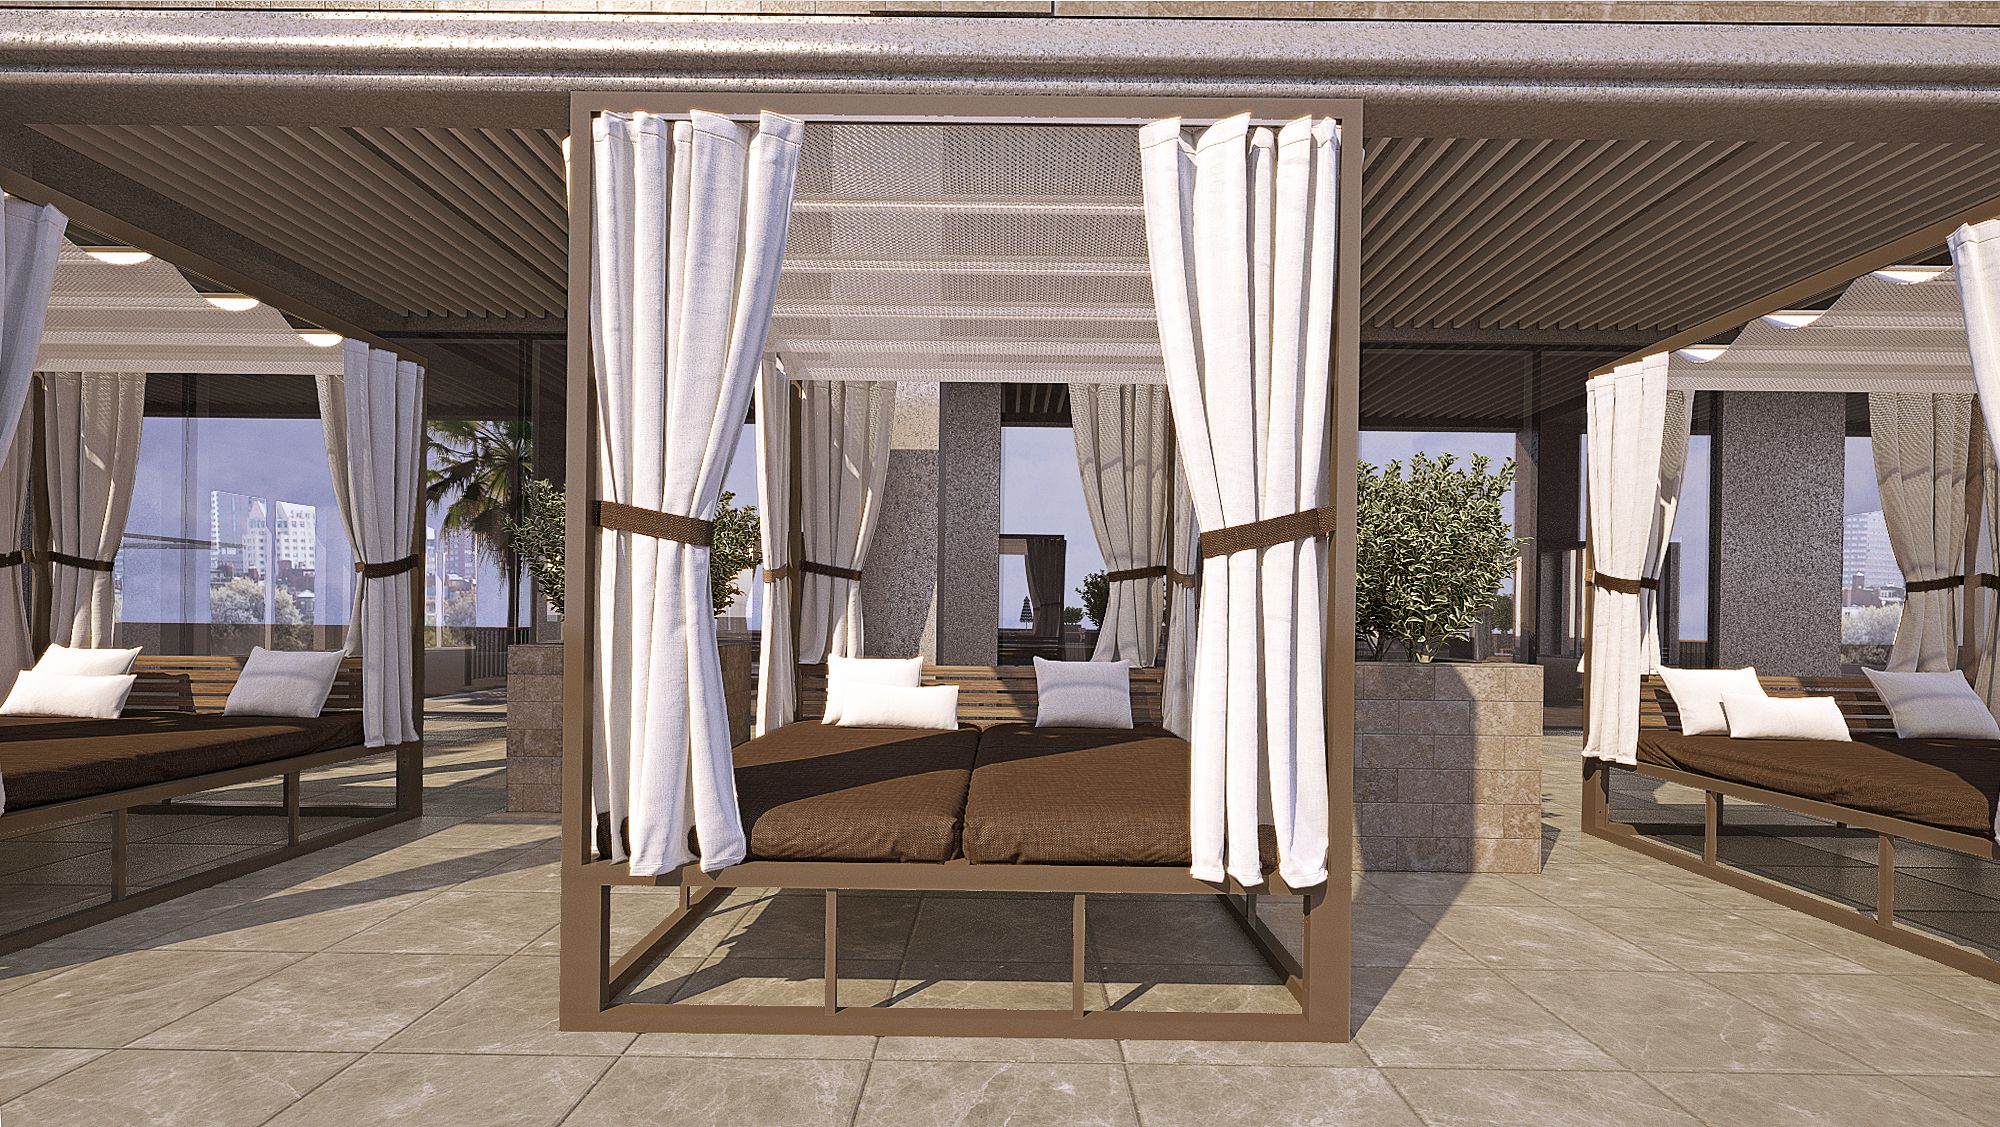 Academy Design's Chateau daybed, photo taken from the front, showcasing its corrosion-resistant 6061-T6 aluminum frame. The daybed features a slide-on wire single panel roof made of marine-grade woven vinyl fabric. All sides, including the front, are adorned with full privacy curtains made of marine-grade upholstery fabric, which can be closed for shade or privacy, epitomizing luxury and comfort for outdoor relaxation.